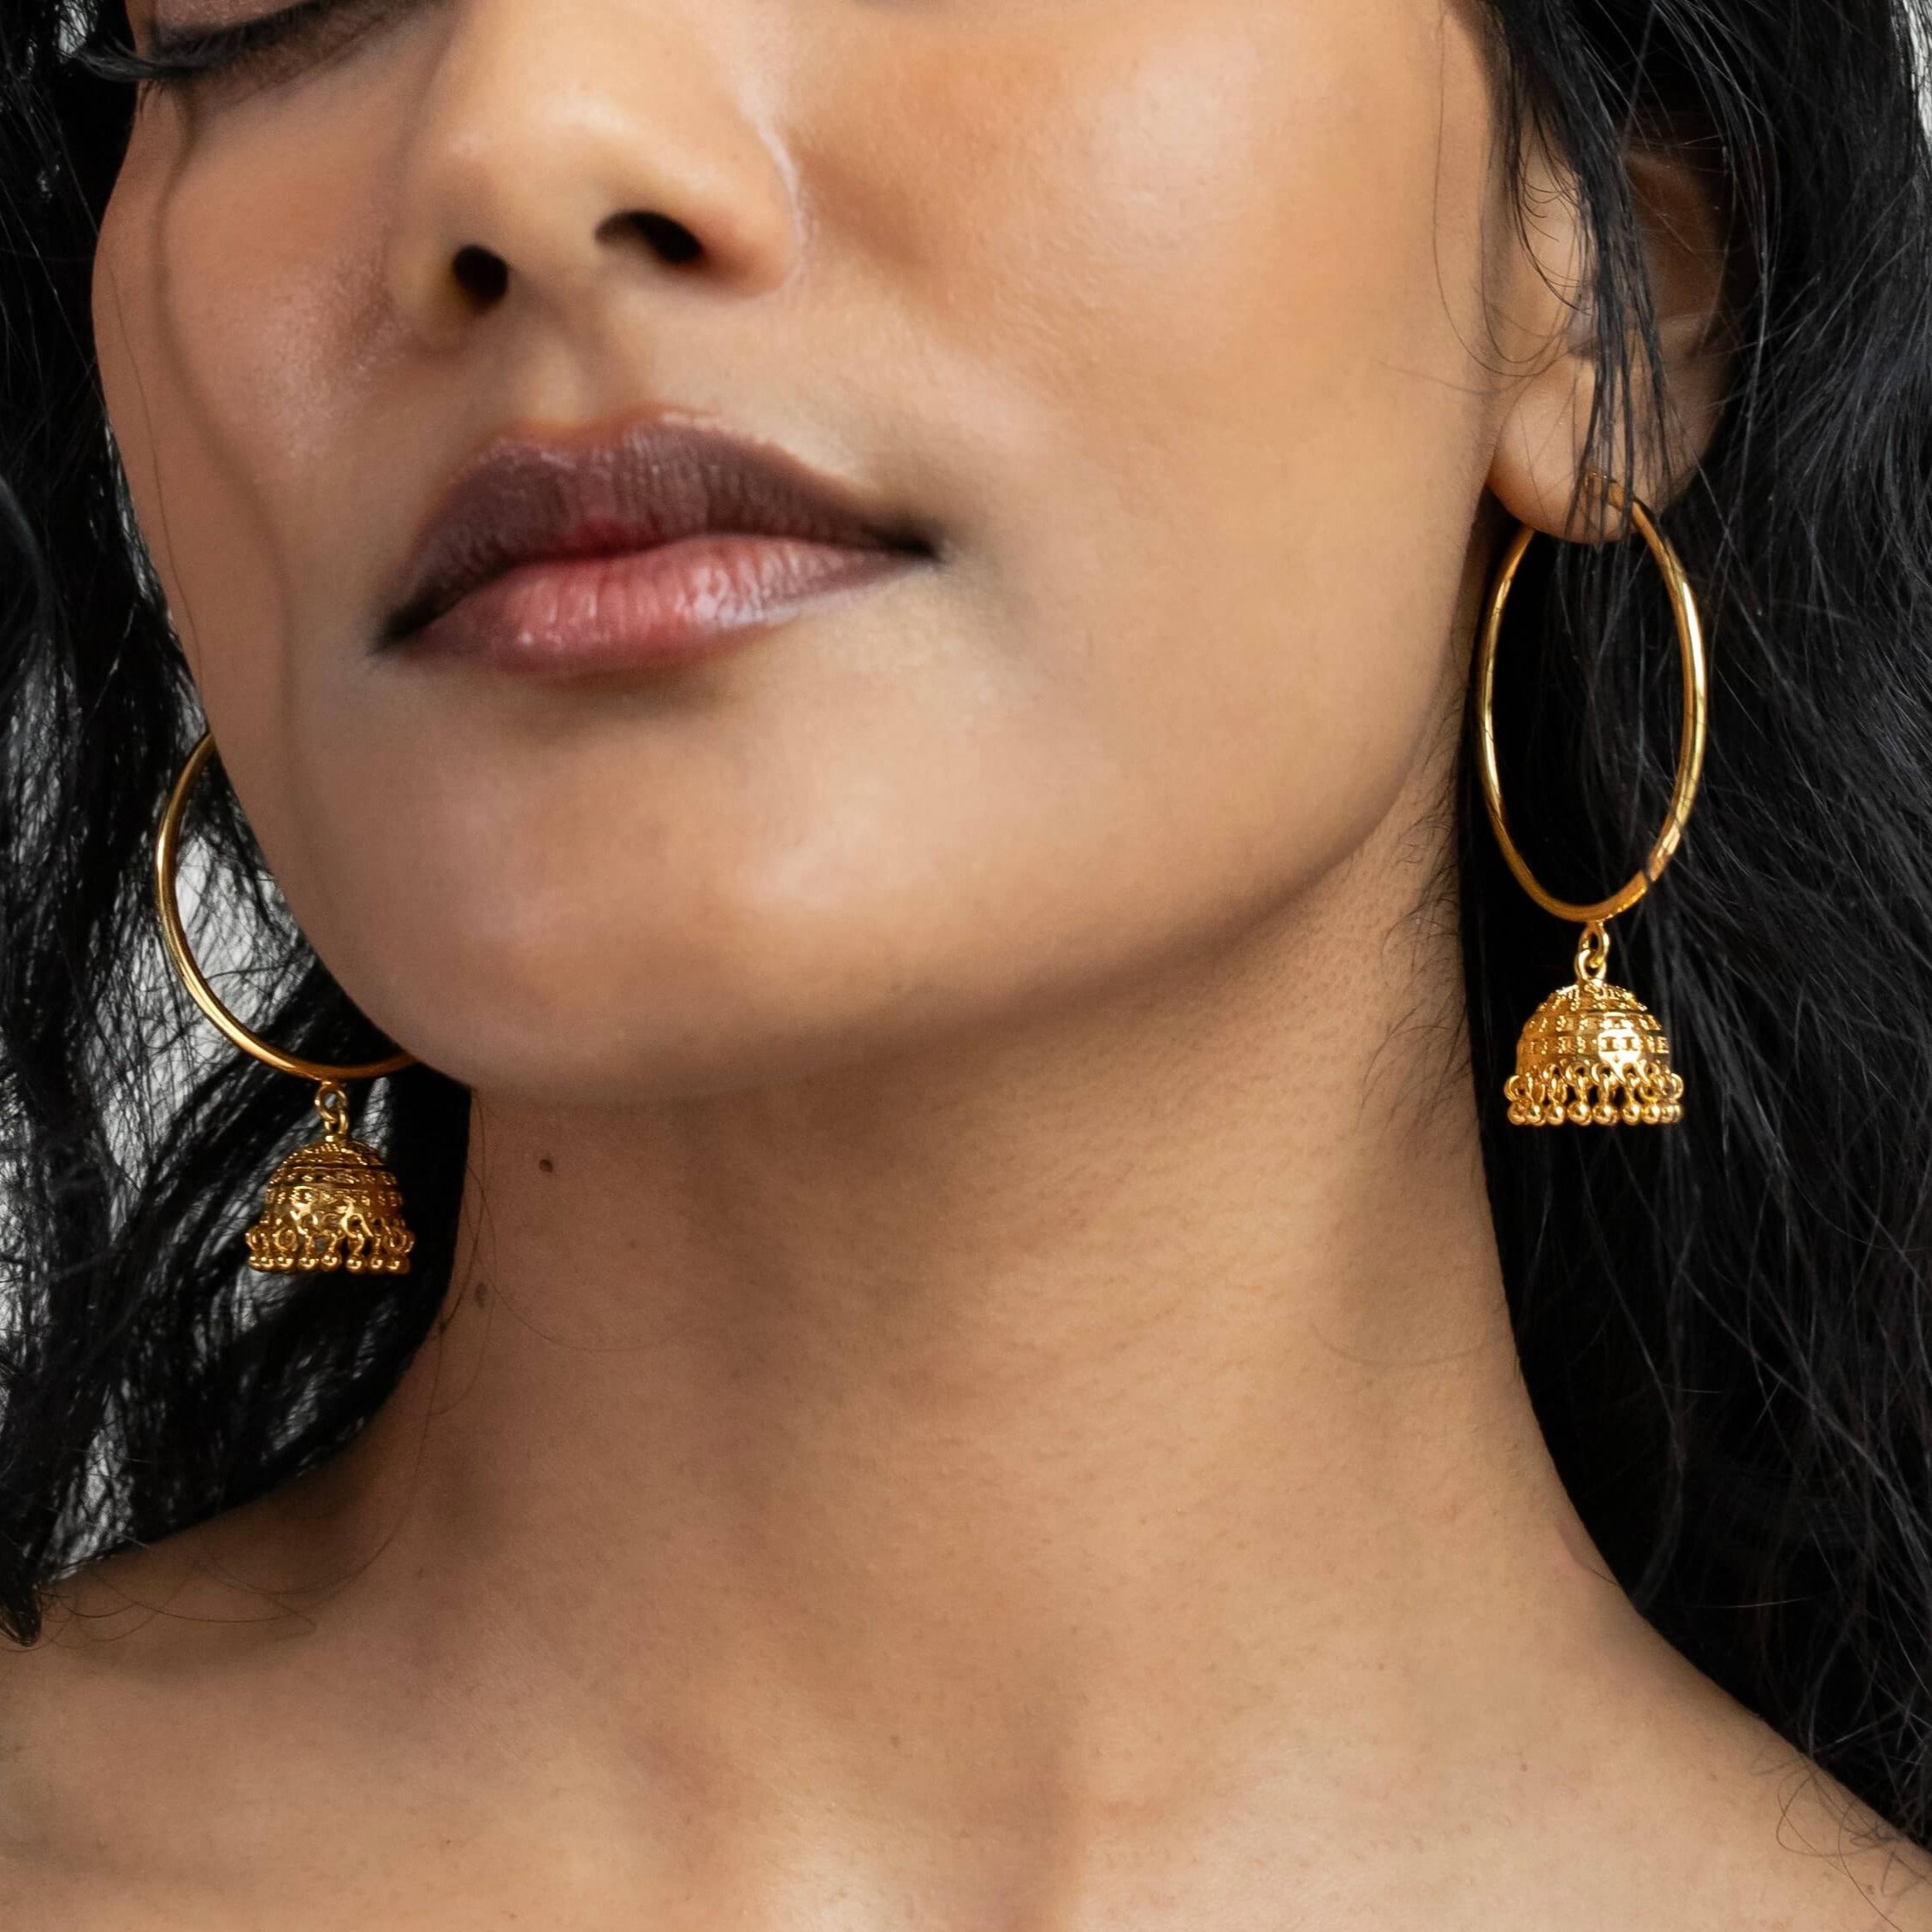 Exotic Earrings: Over 6,269 Royalty-Free Licensable Stock Photos |  Shutterstock